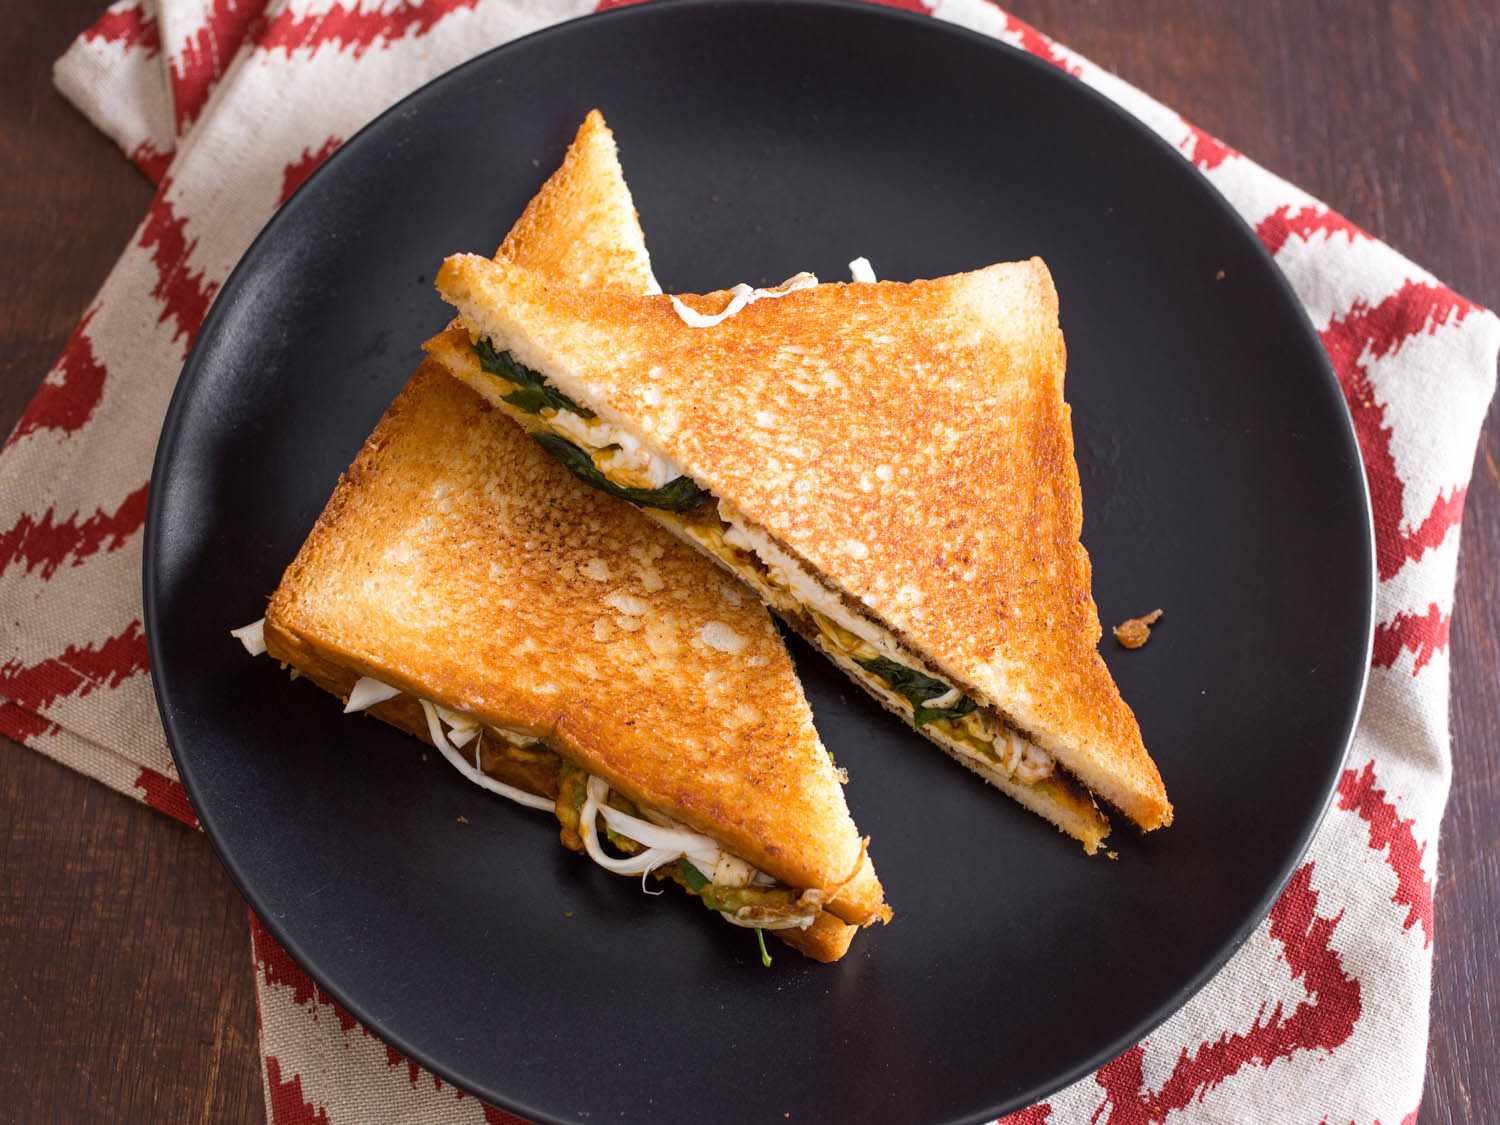 how-to-bake-or-toast-sandwiches-like-quiznos